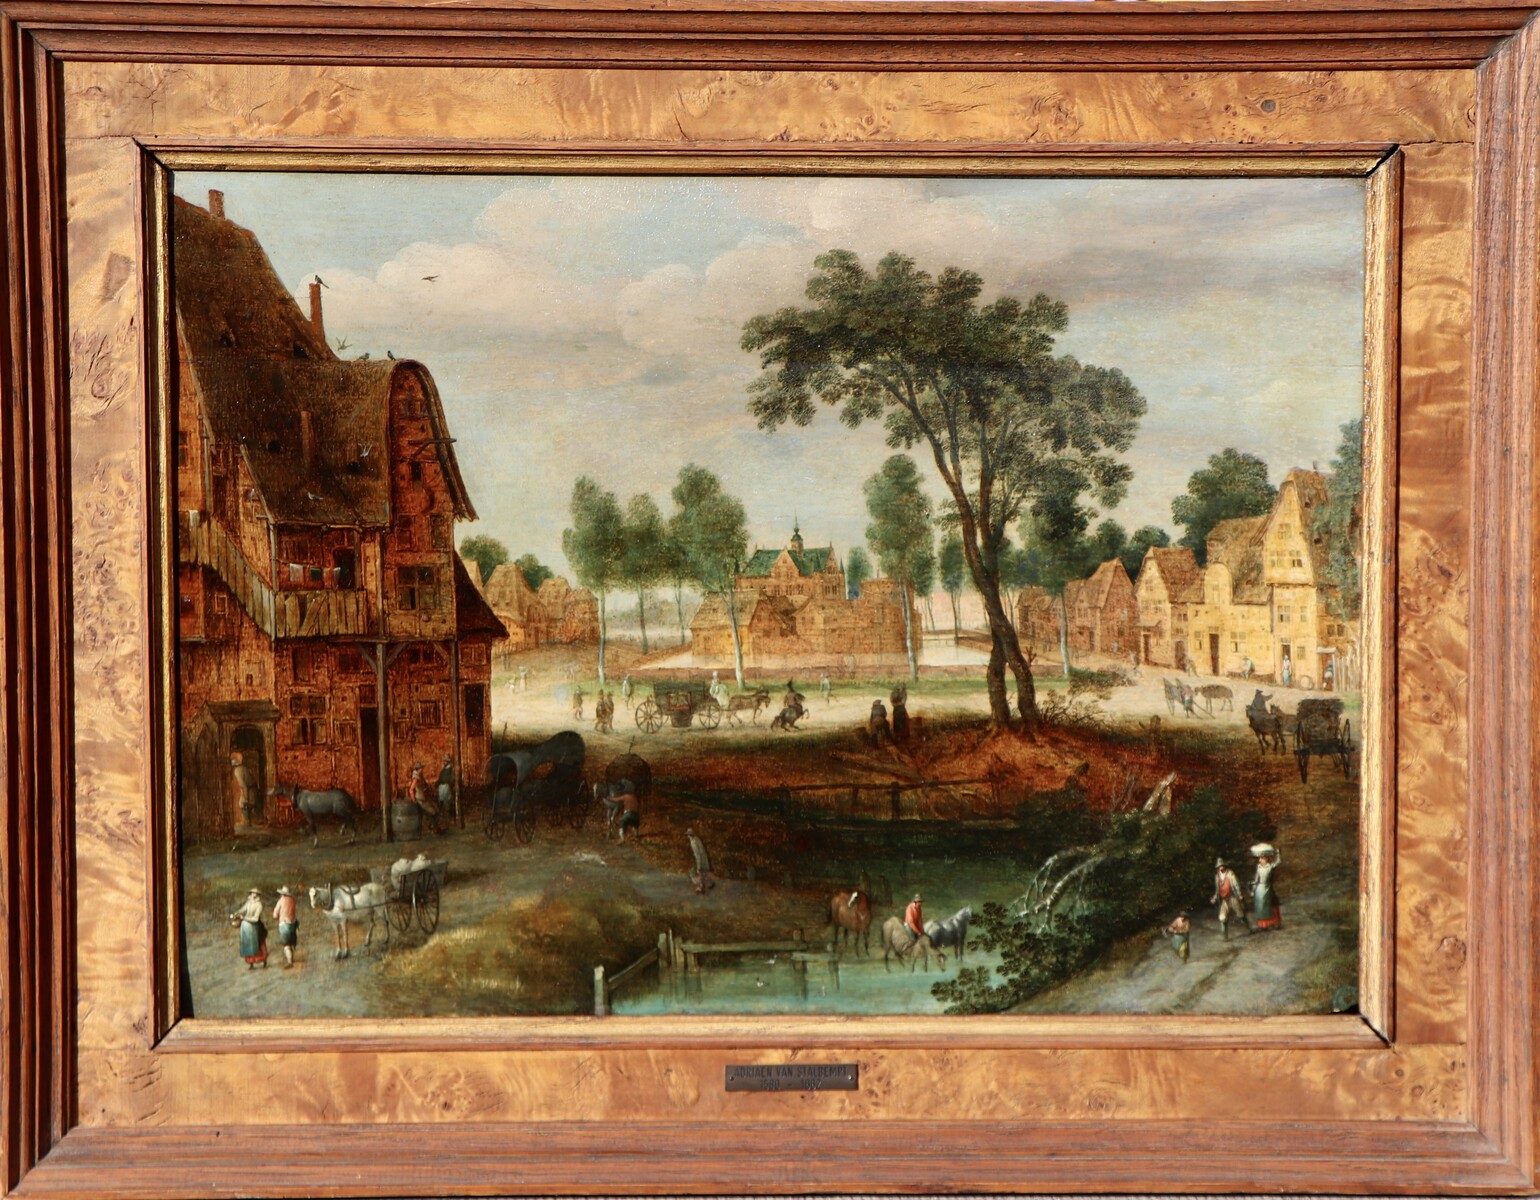 A village view with a watering hole